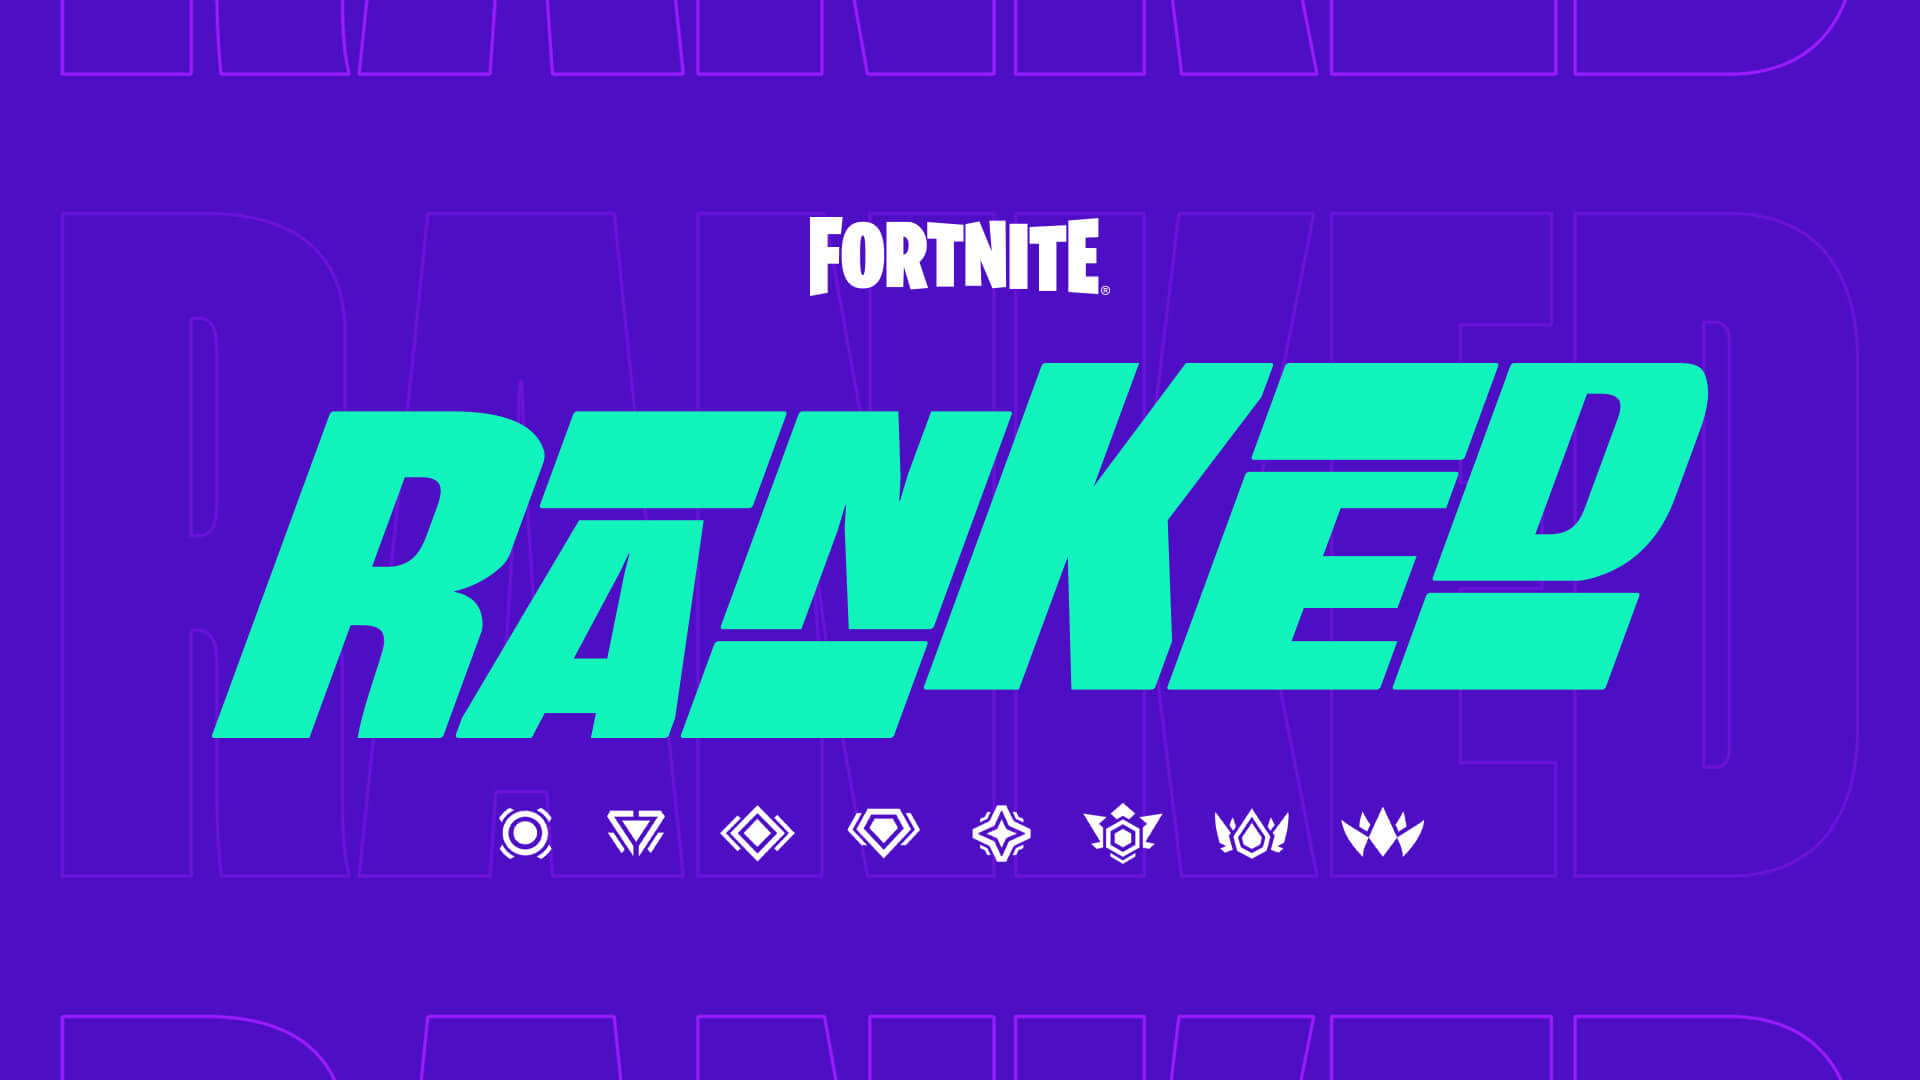 Fortnite announces official ranked play for multiple modes